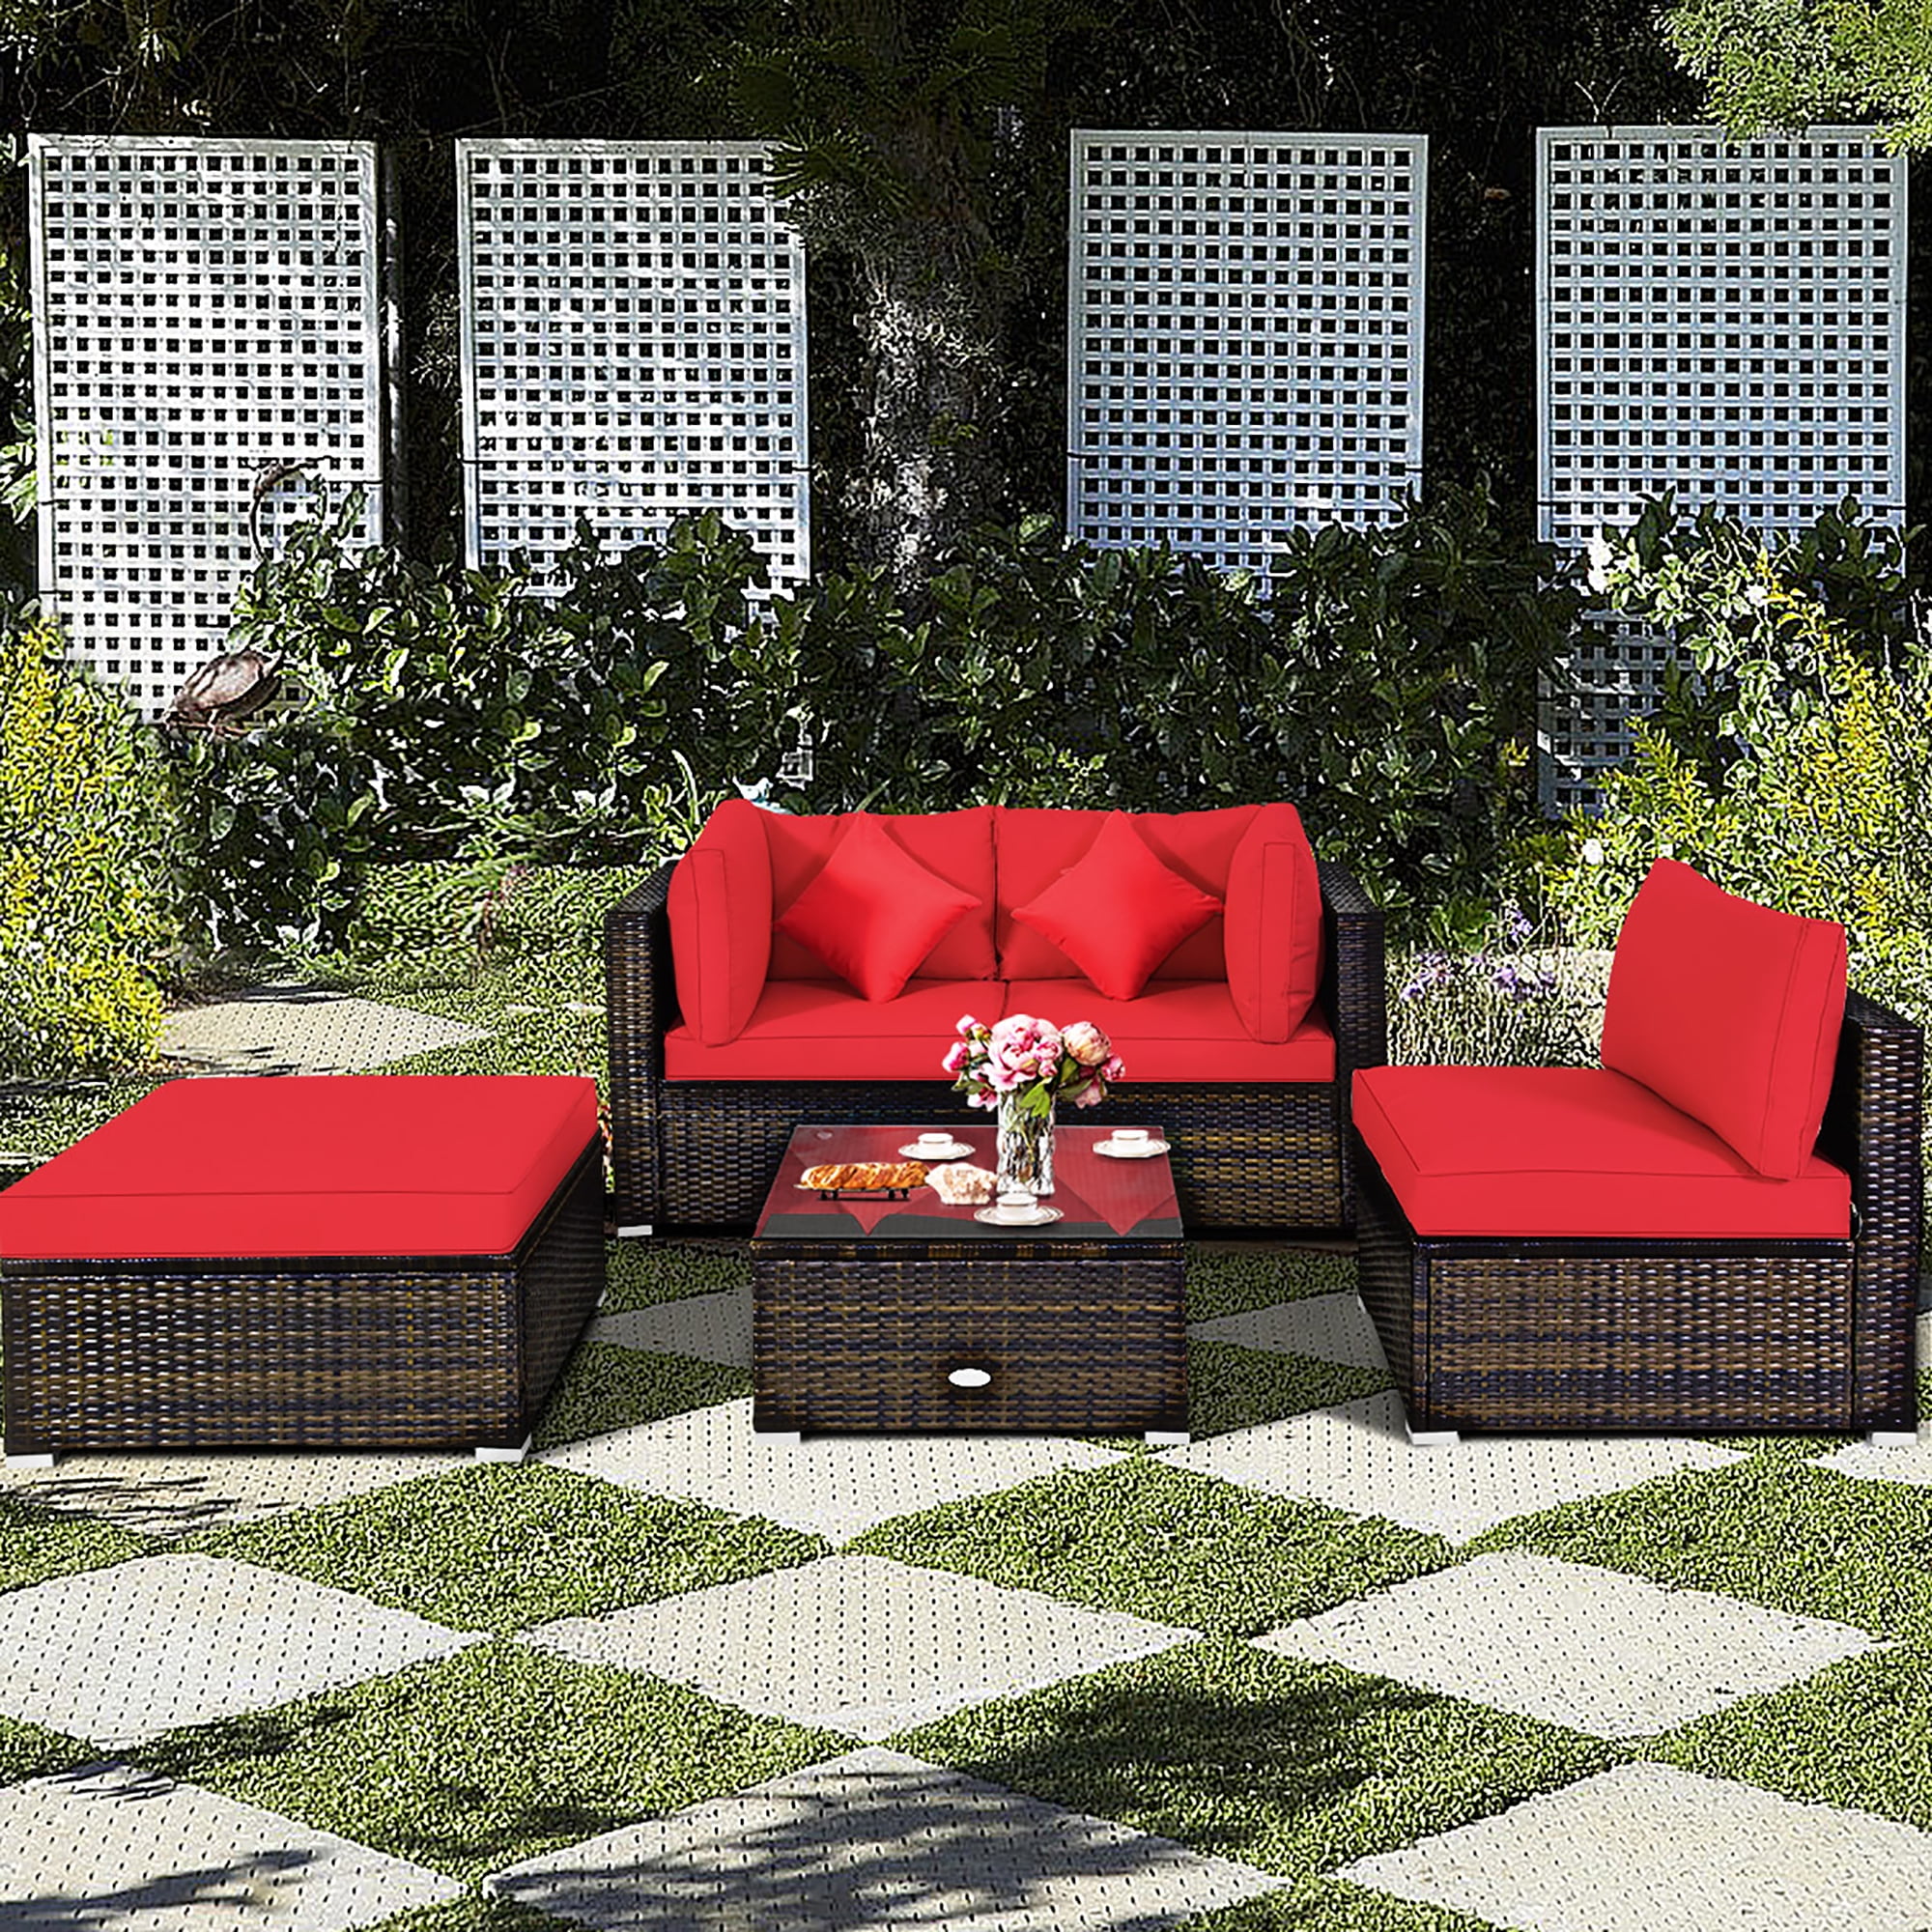 Choosing The Right Furniture For Your Patio Or Outdoor Space